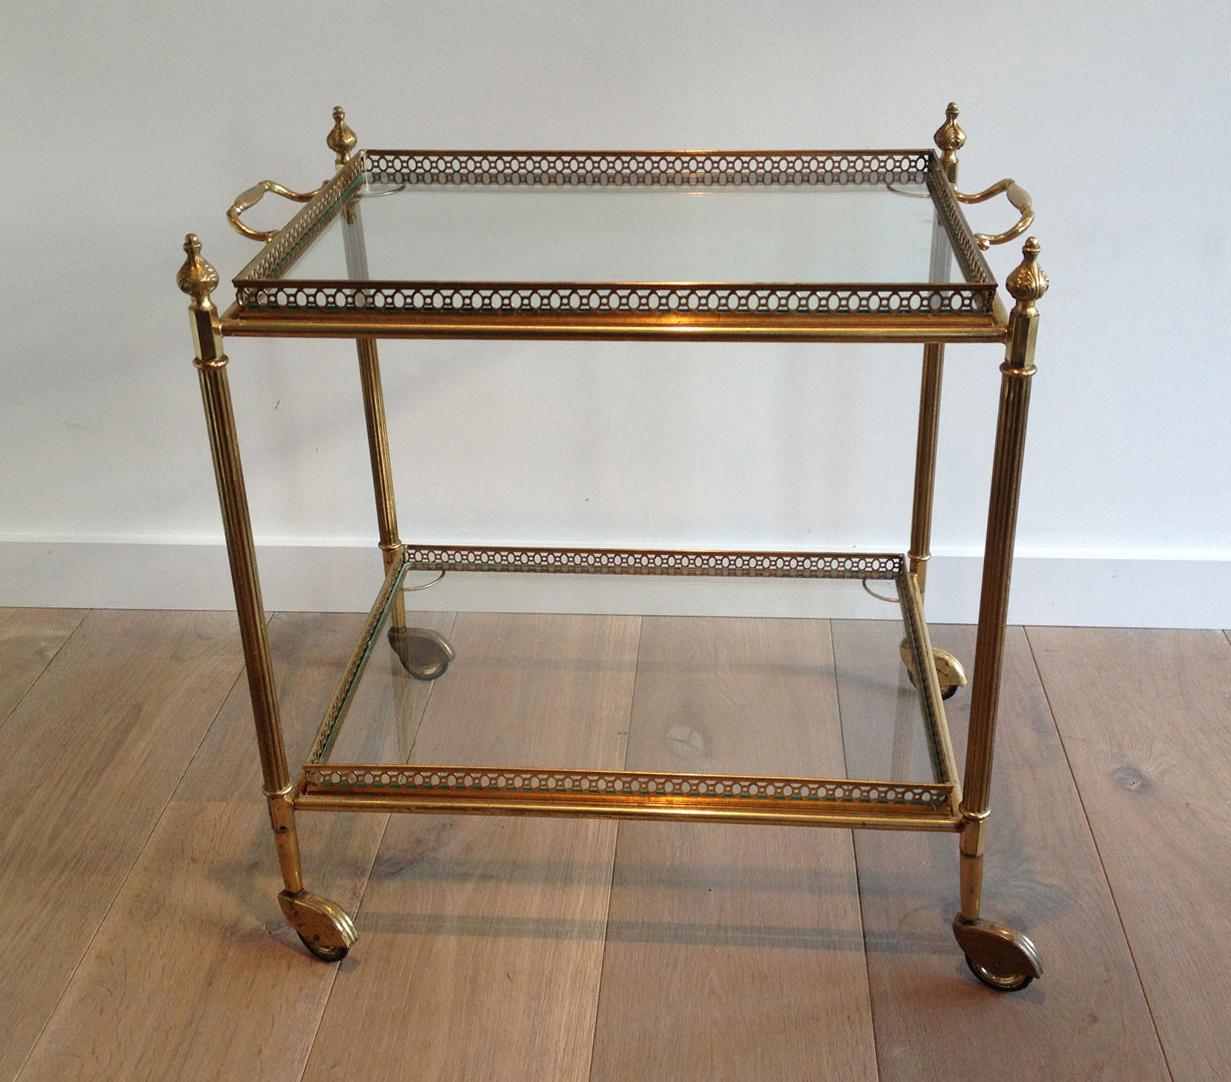 This neoclassical style drinks trolley is made of brass with removable trays. This bar cart is a French work in the style of Maison Jansen. Circa 1940